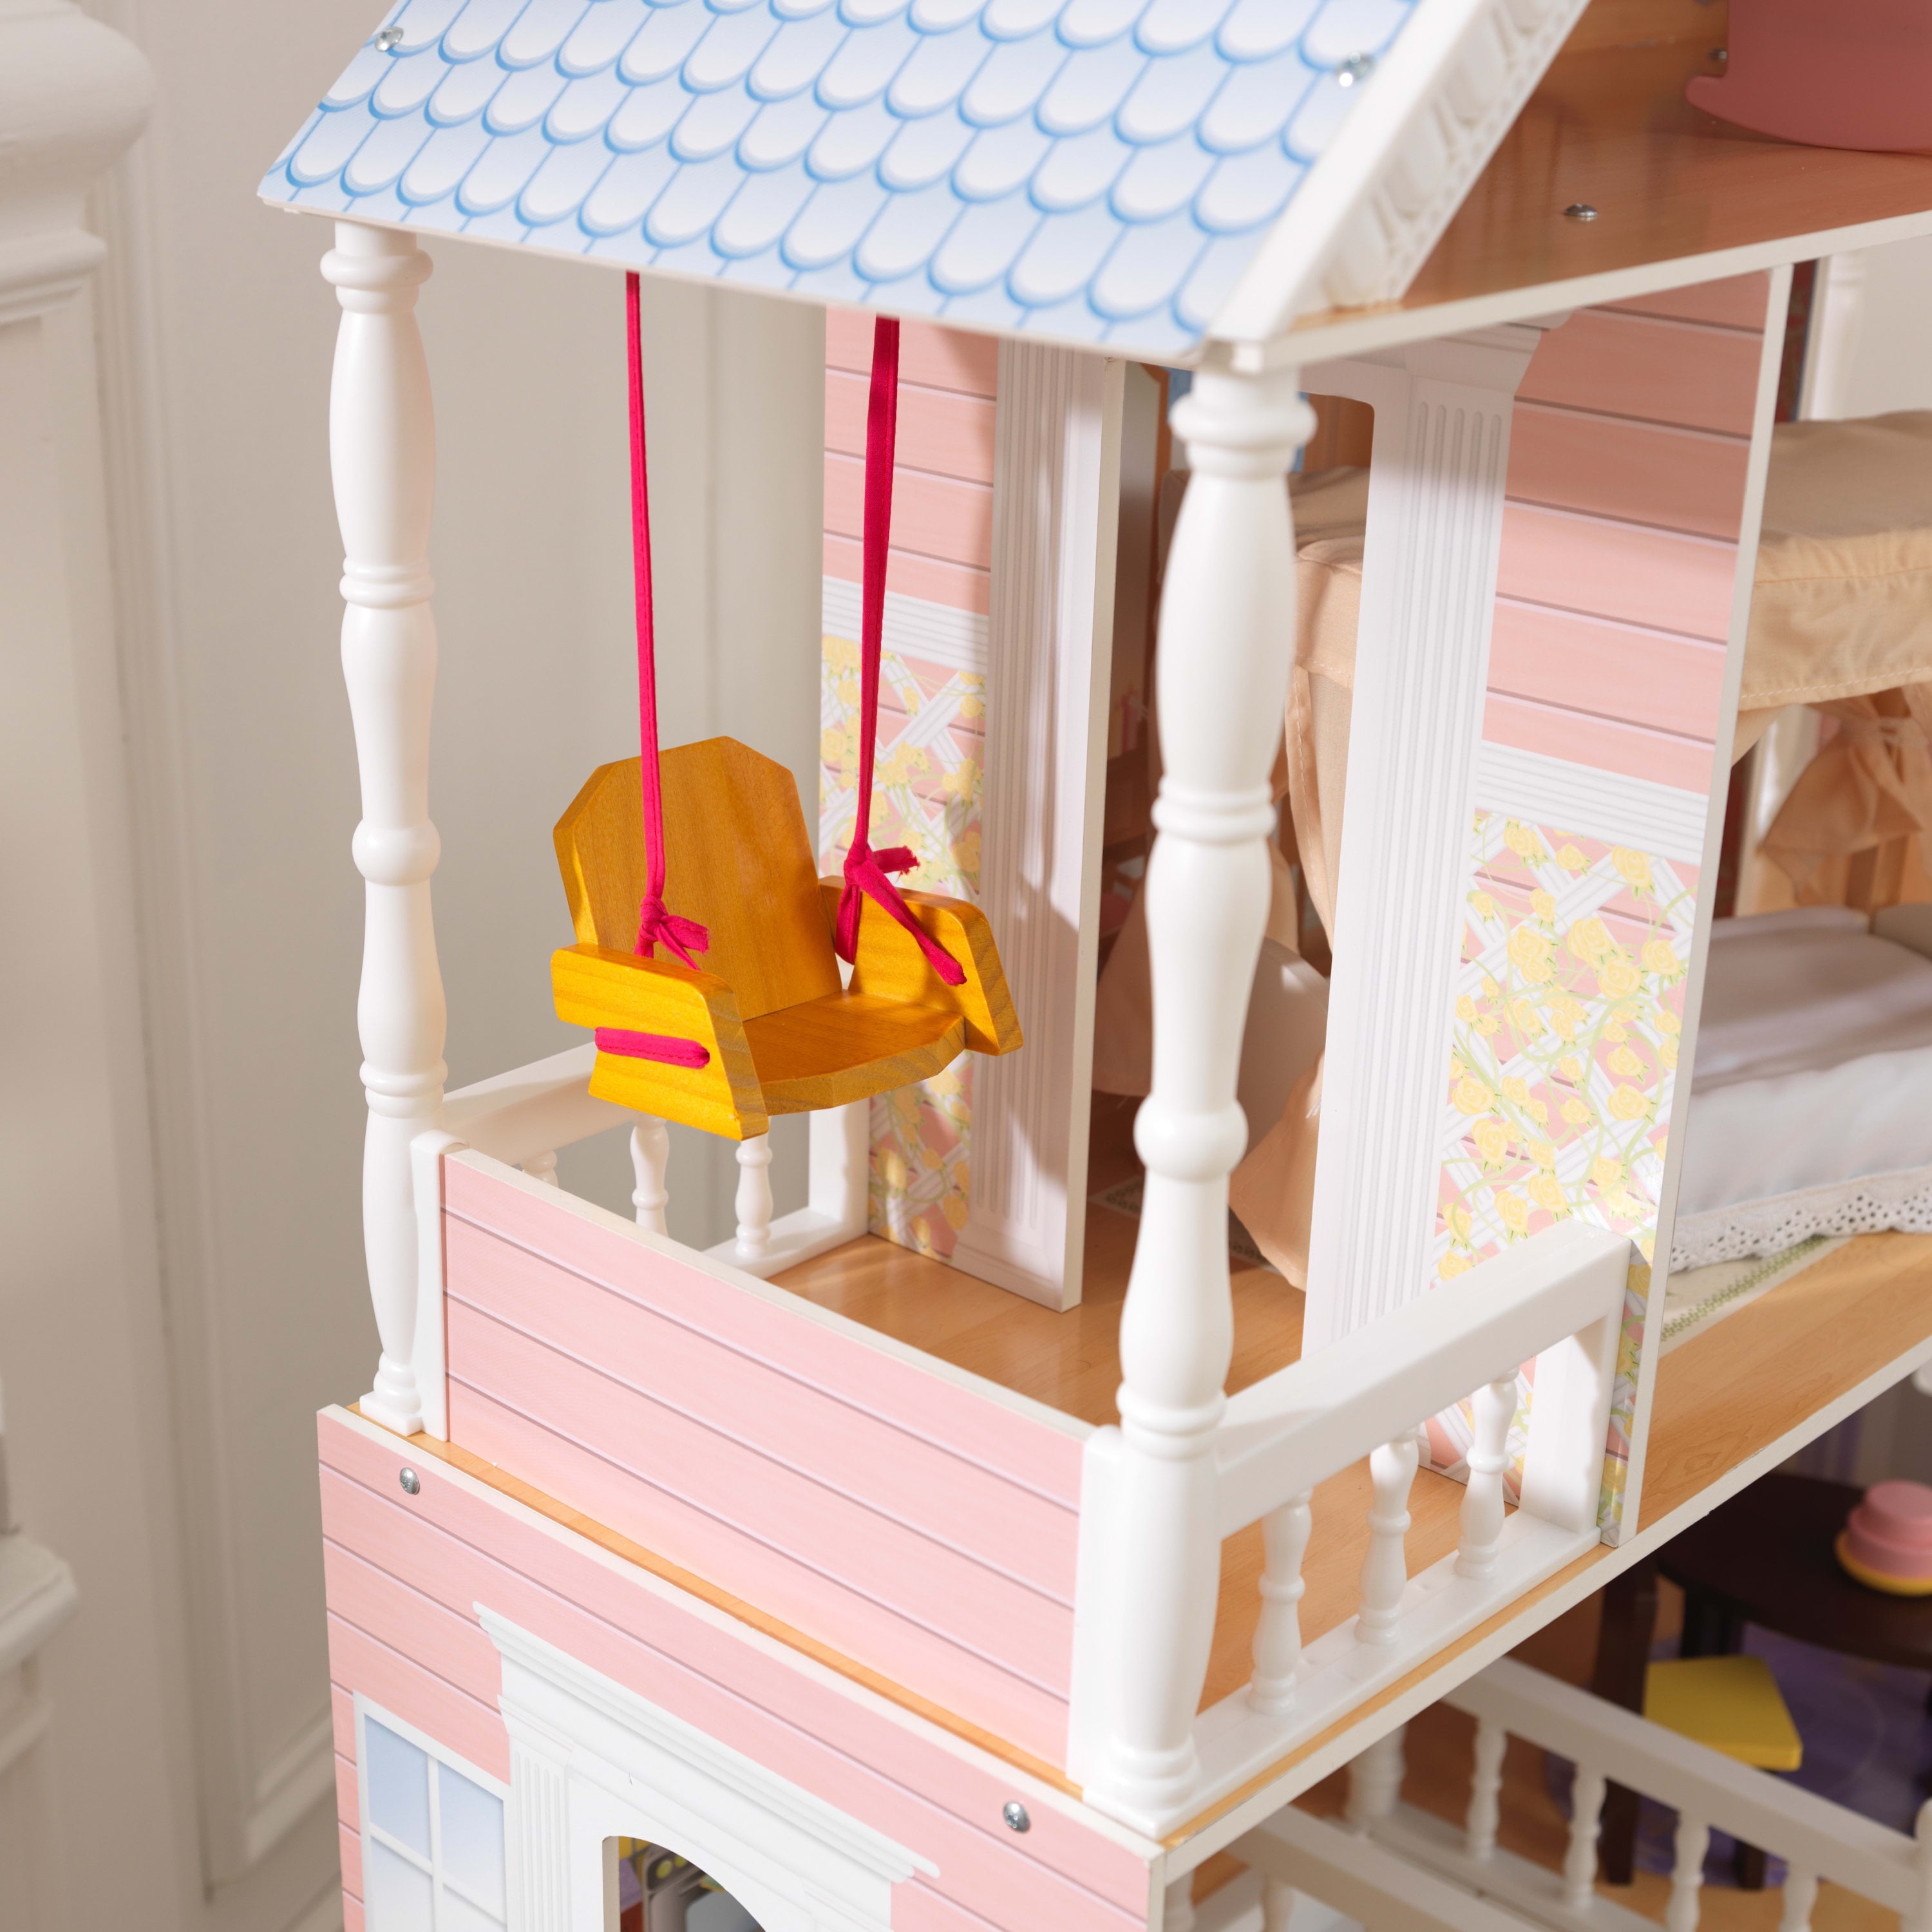 KidKraft Savannah Wooden Doll House Sale - Almost 50% Off & Works with  Barbies